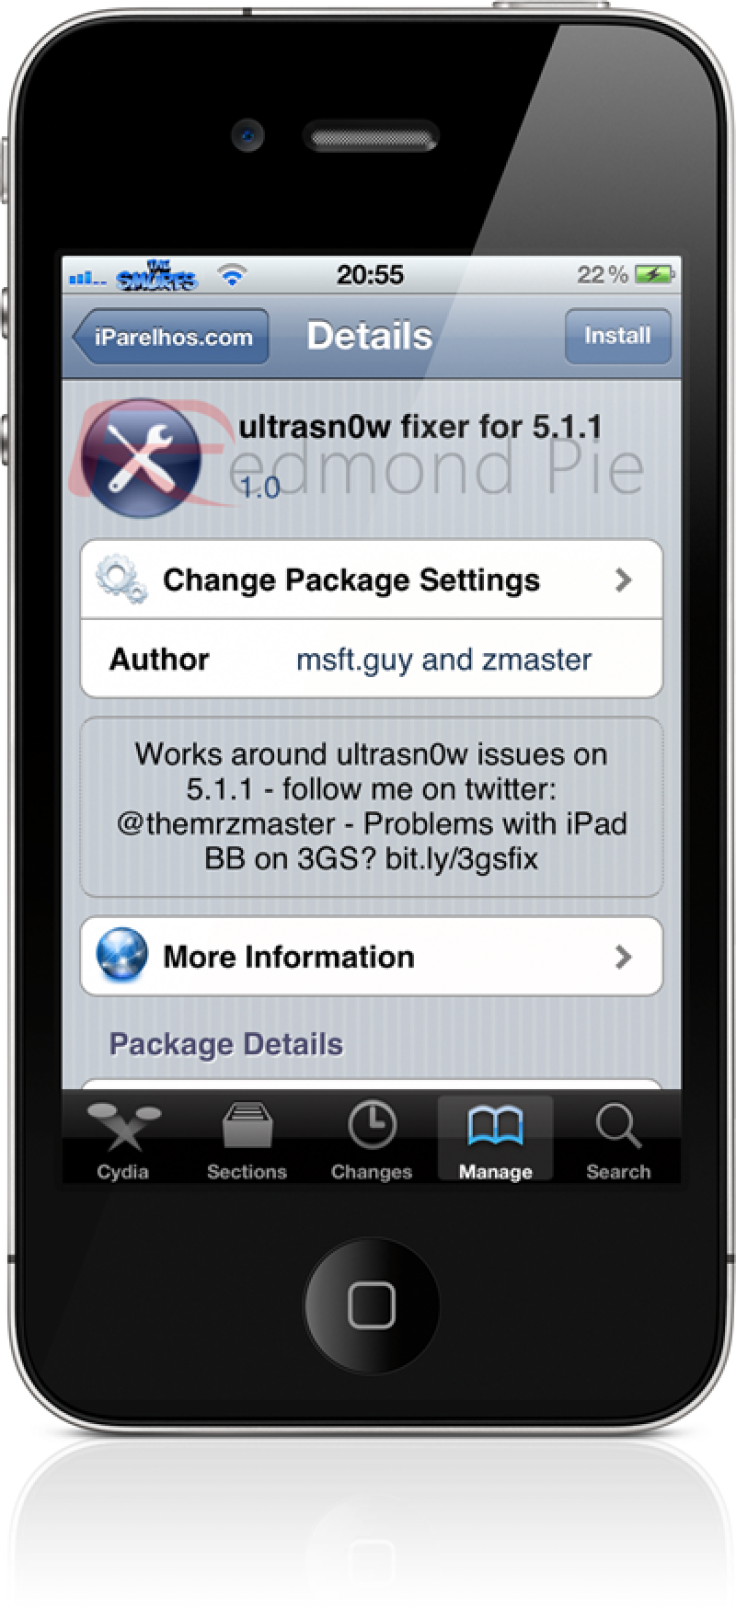 Ultrasn0w Fixer for iOS 5.1.1 Repo Package